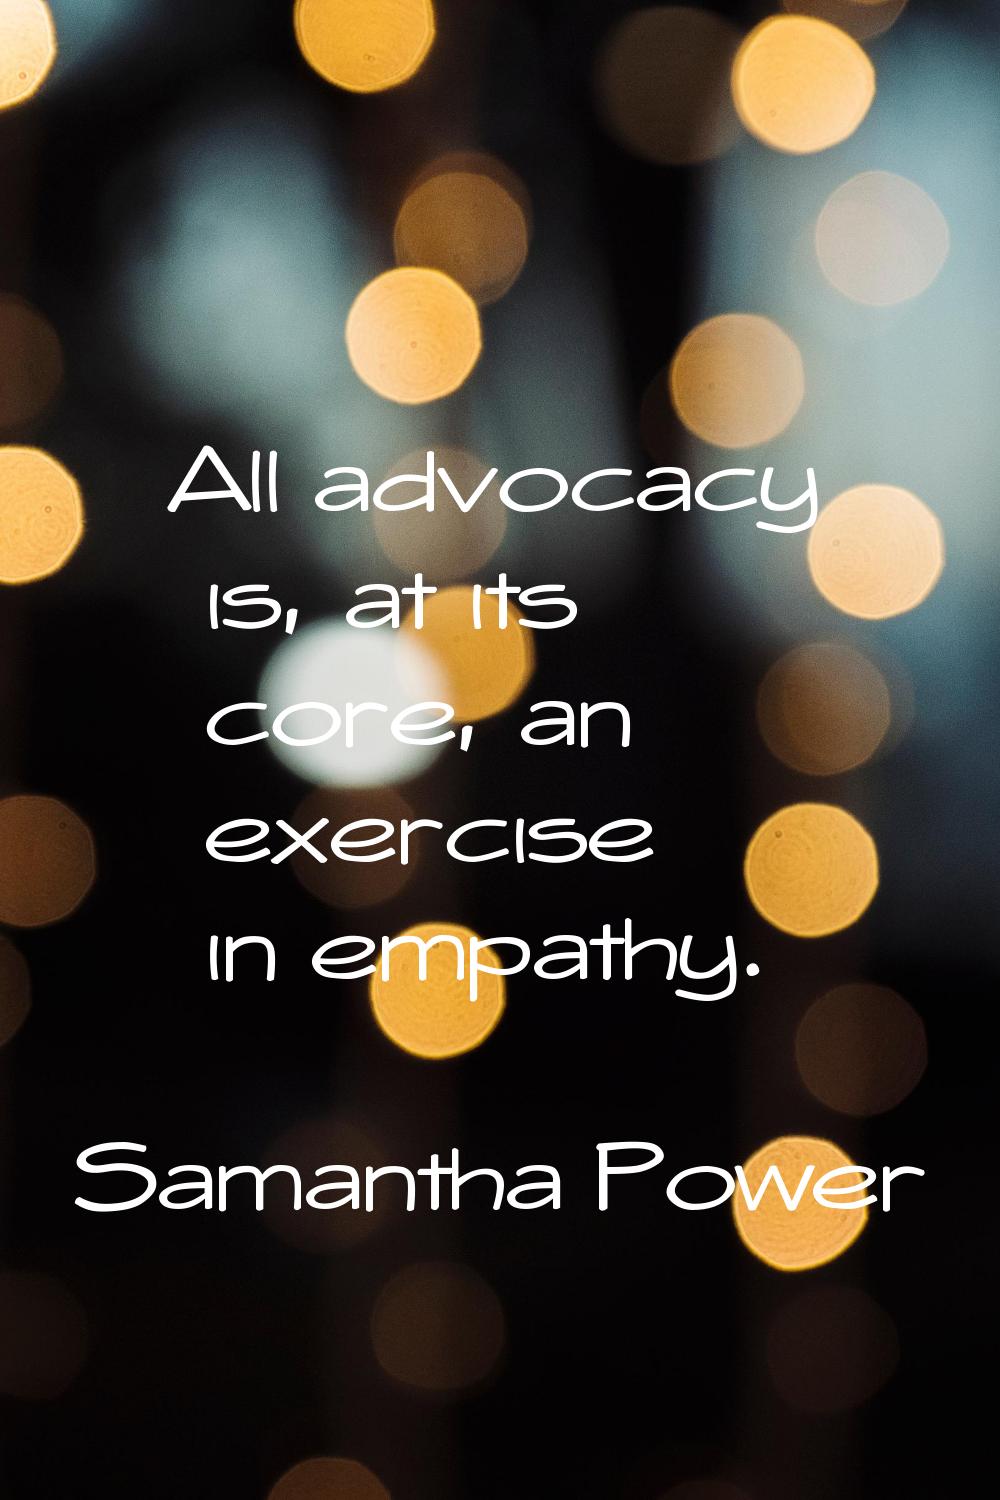 All advocacy is, at its core, an exercise in empathy.